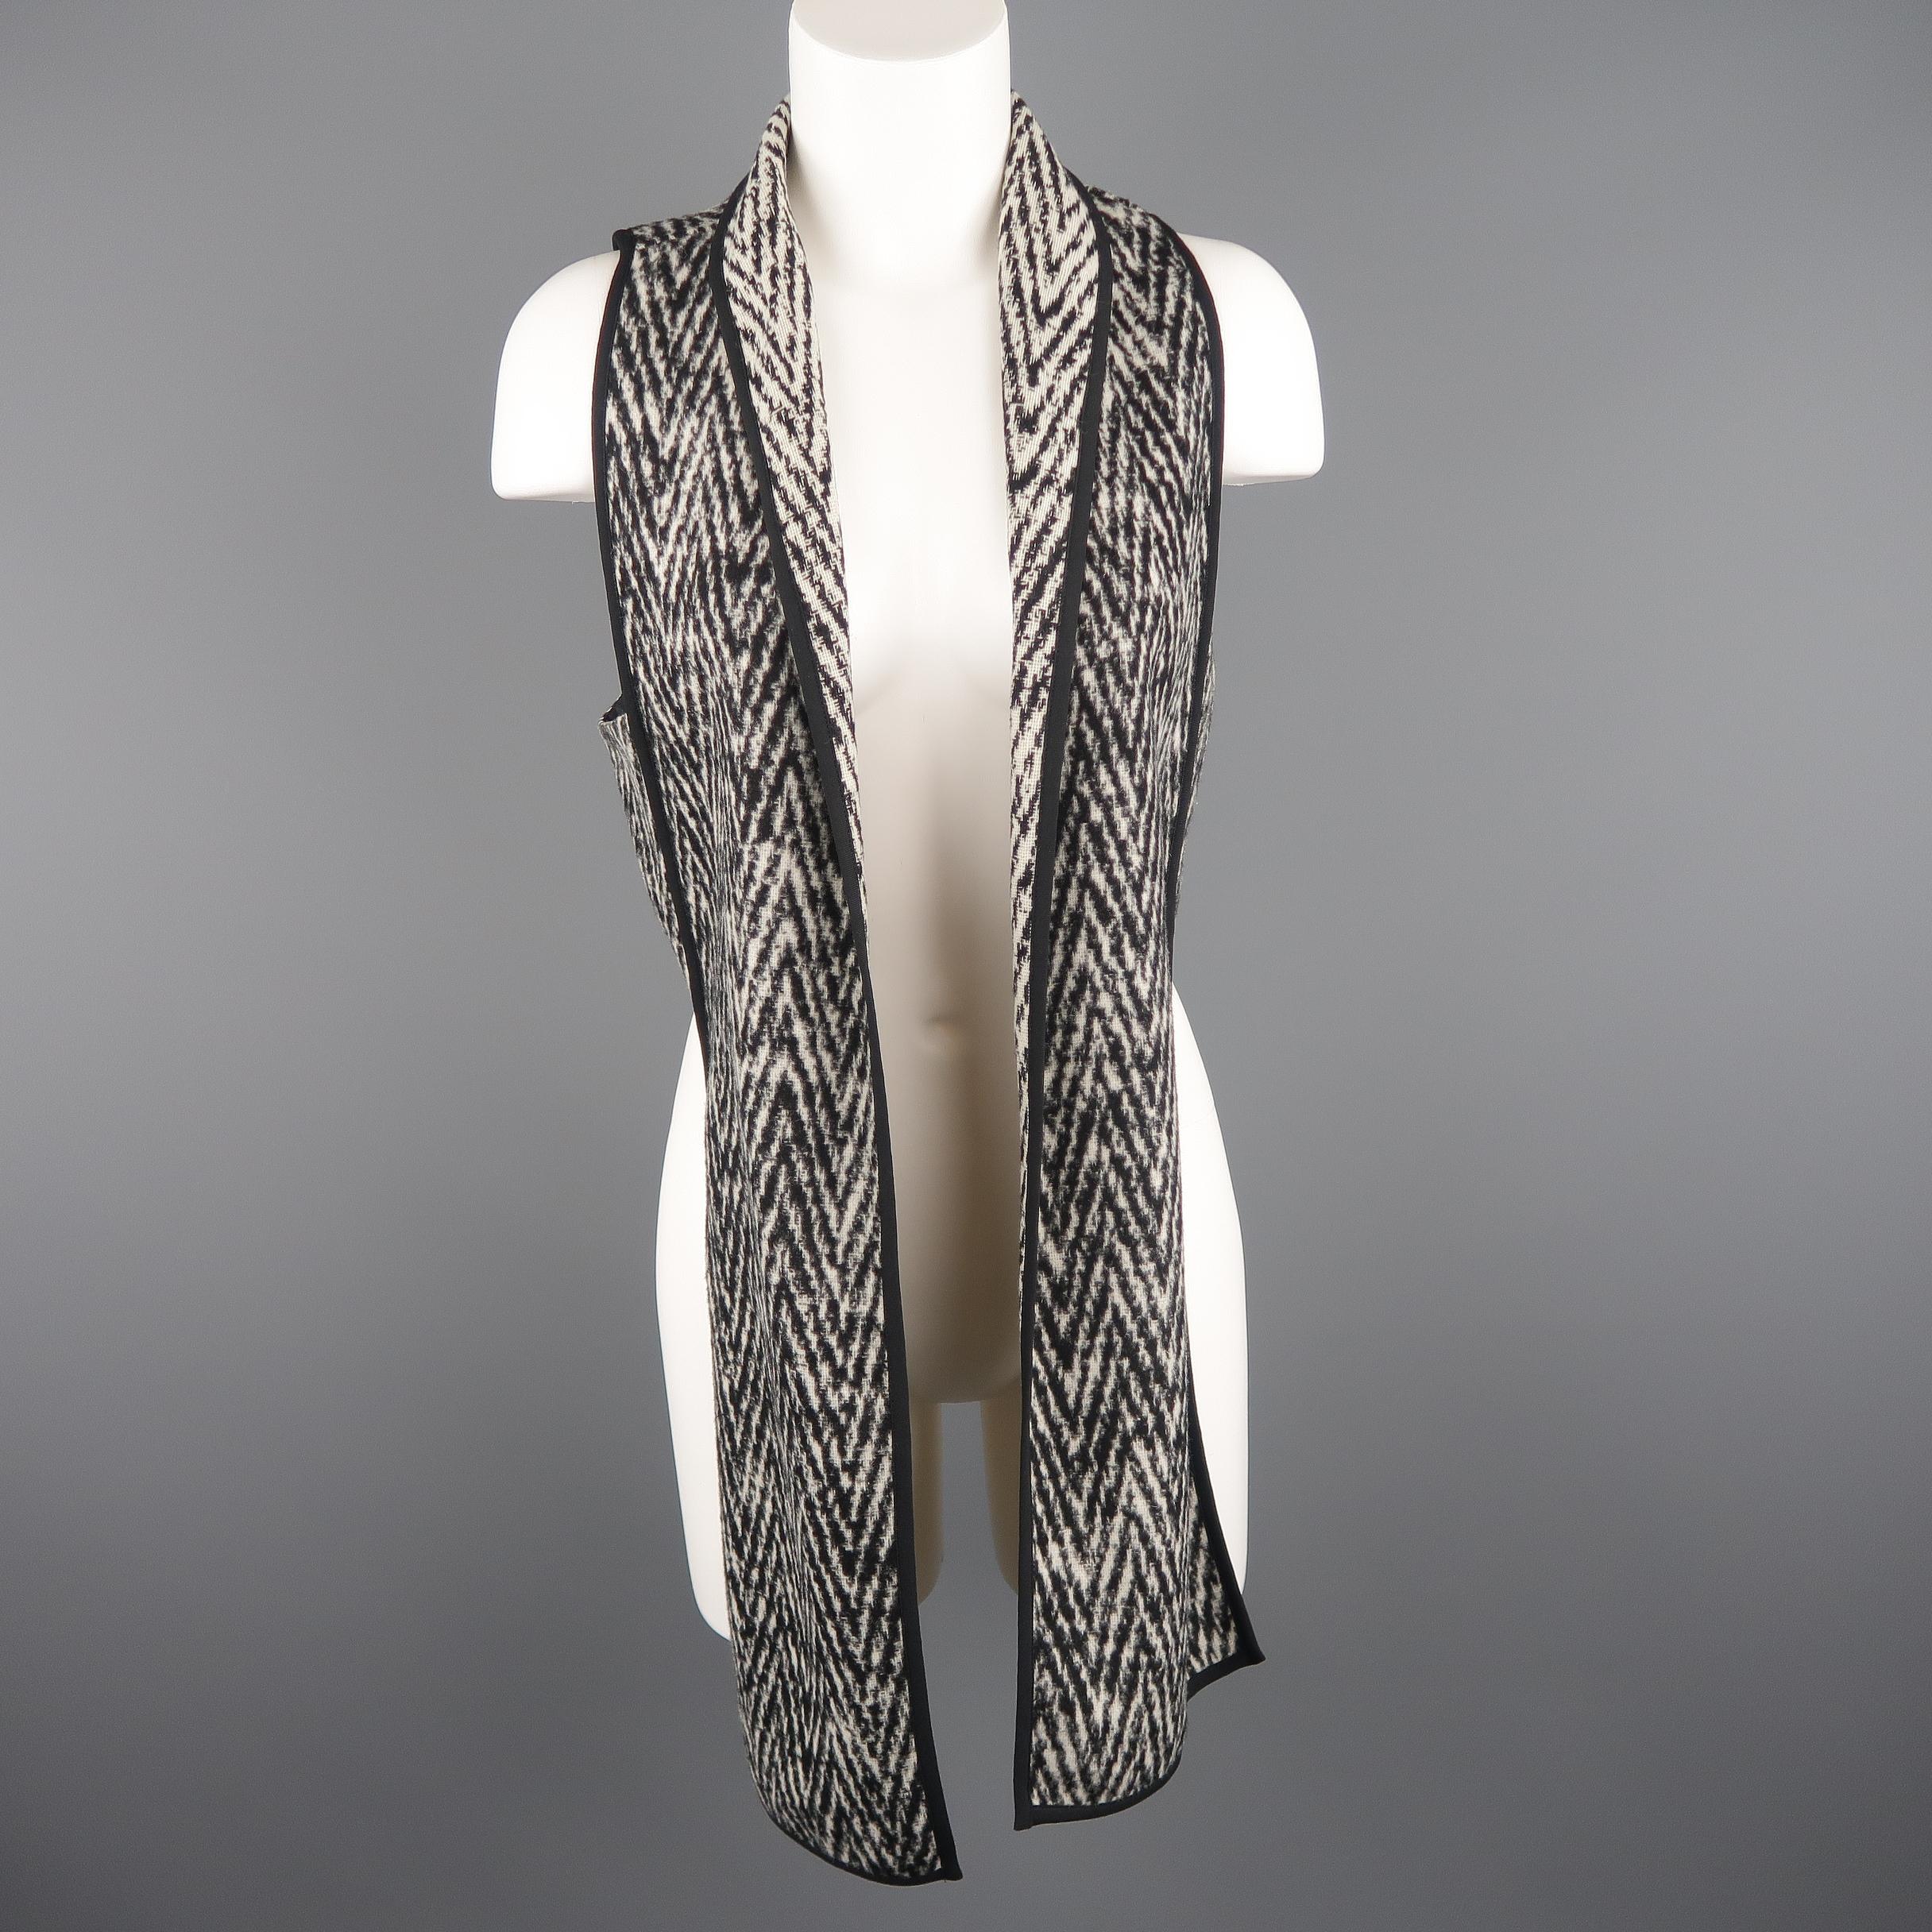 MARISSA WEBB vest comes in a black and beige chevron wool blend with nylon liner, geometric long collar front, and short back.
 
New with Tags.
Marked: S
 
Measurements:
 
Shoulder: 11 in.
Bust: 36 in.
Length: 18 - 33 in.